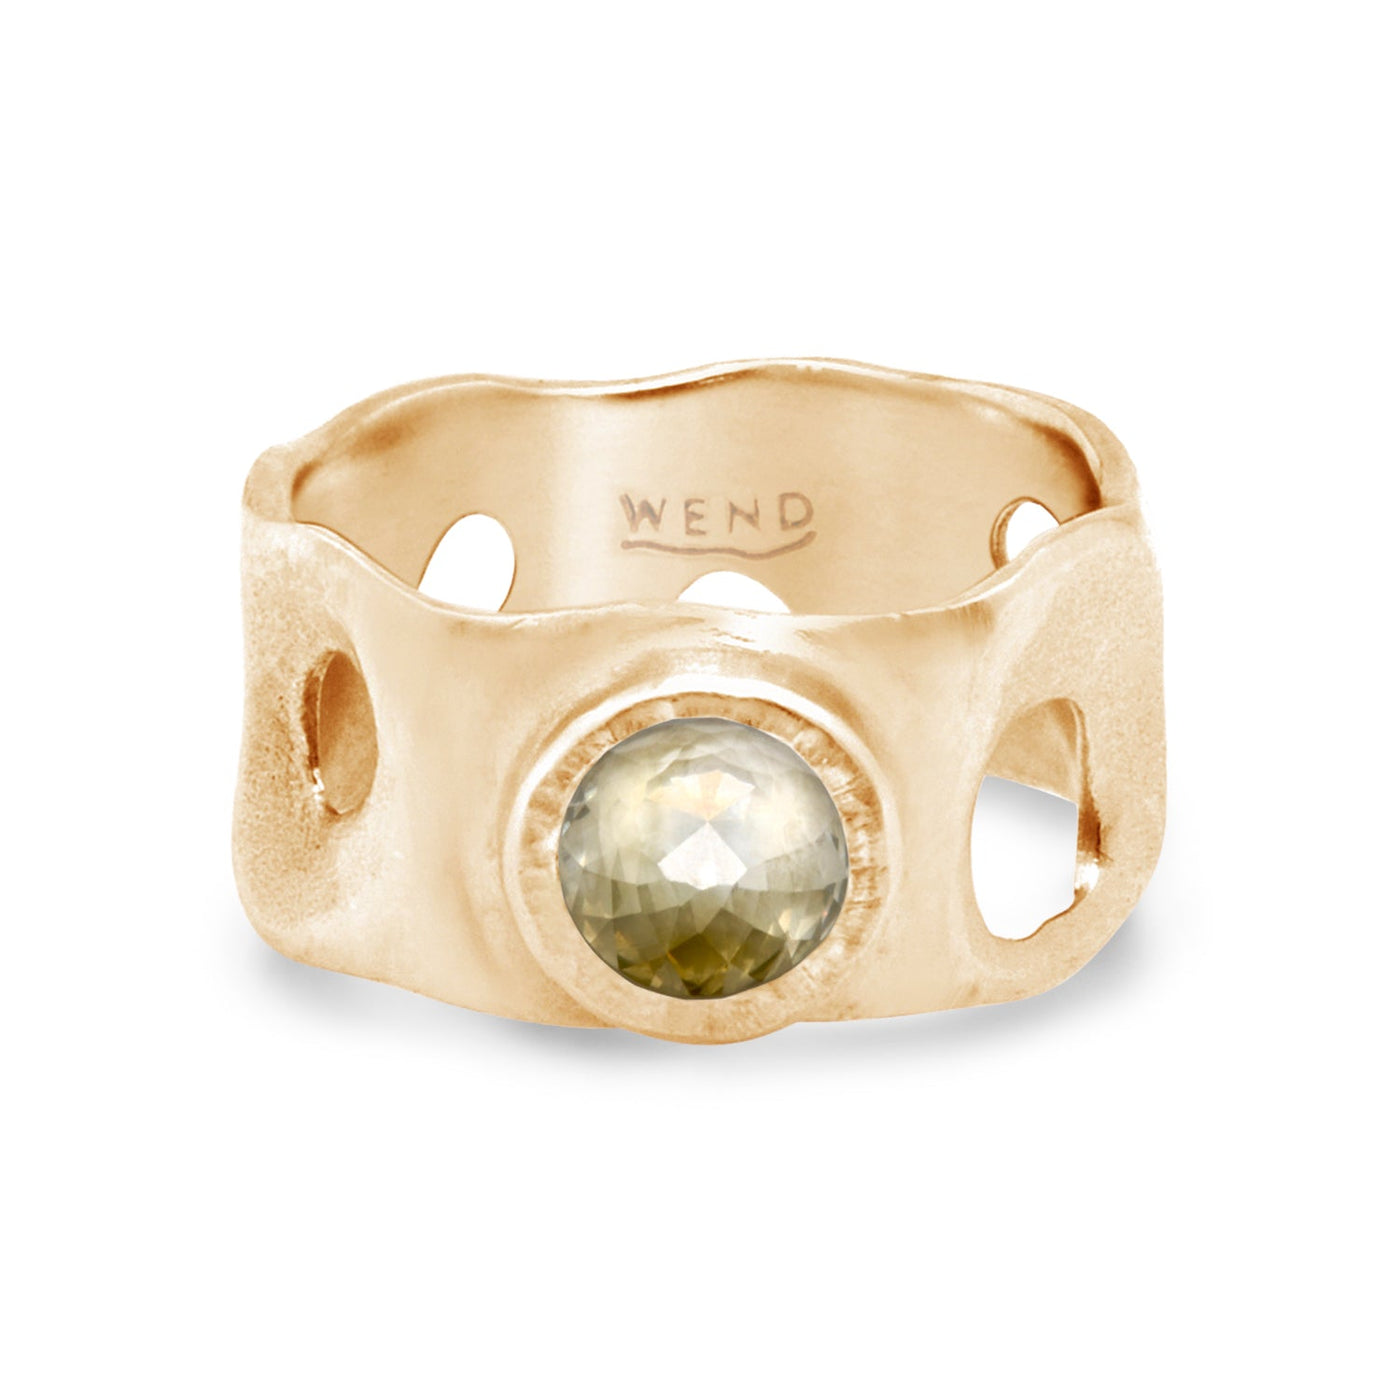 Tidepools ring band inspired by ocean tide pools with a recycled vintage diamond known as a heritage diamond in certified recycled gold by WEND Jewelry #gemstone-size_6mm